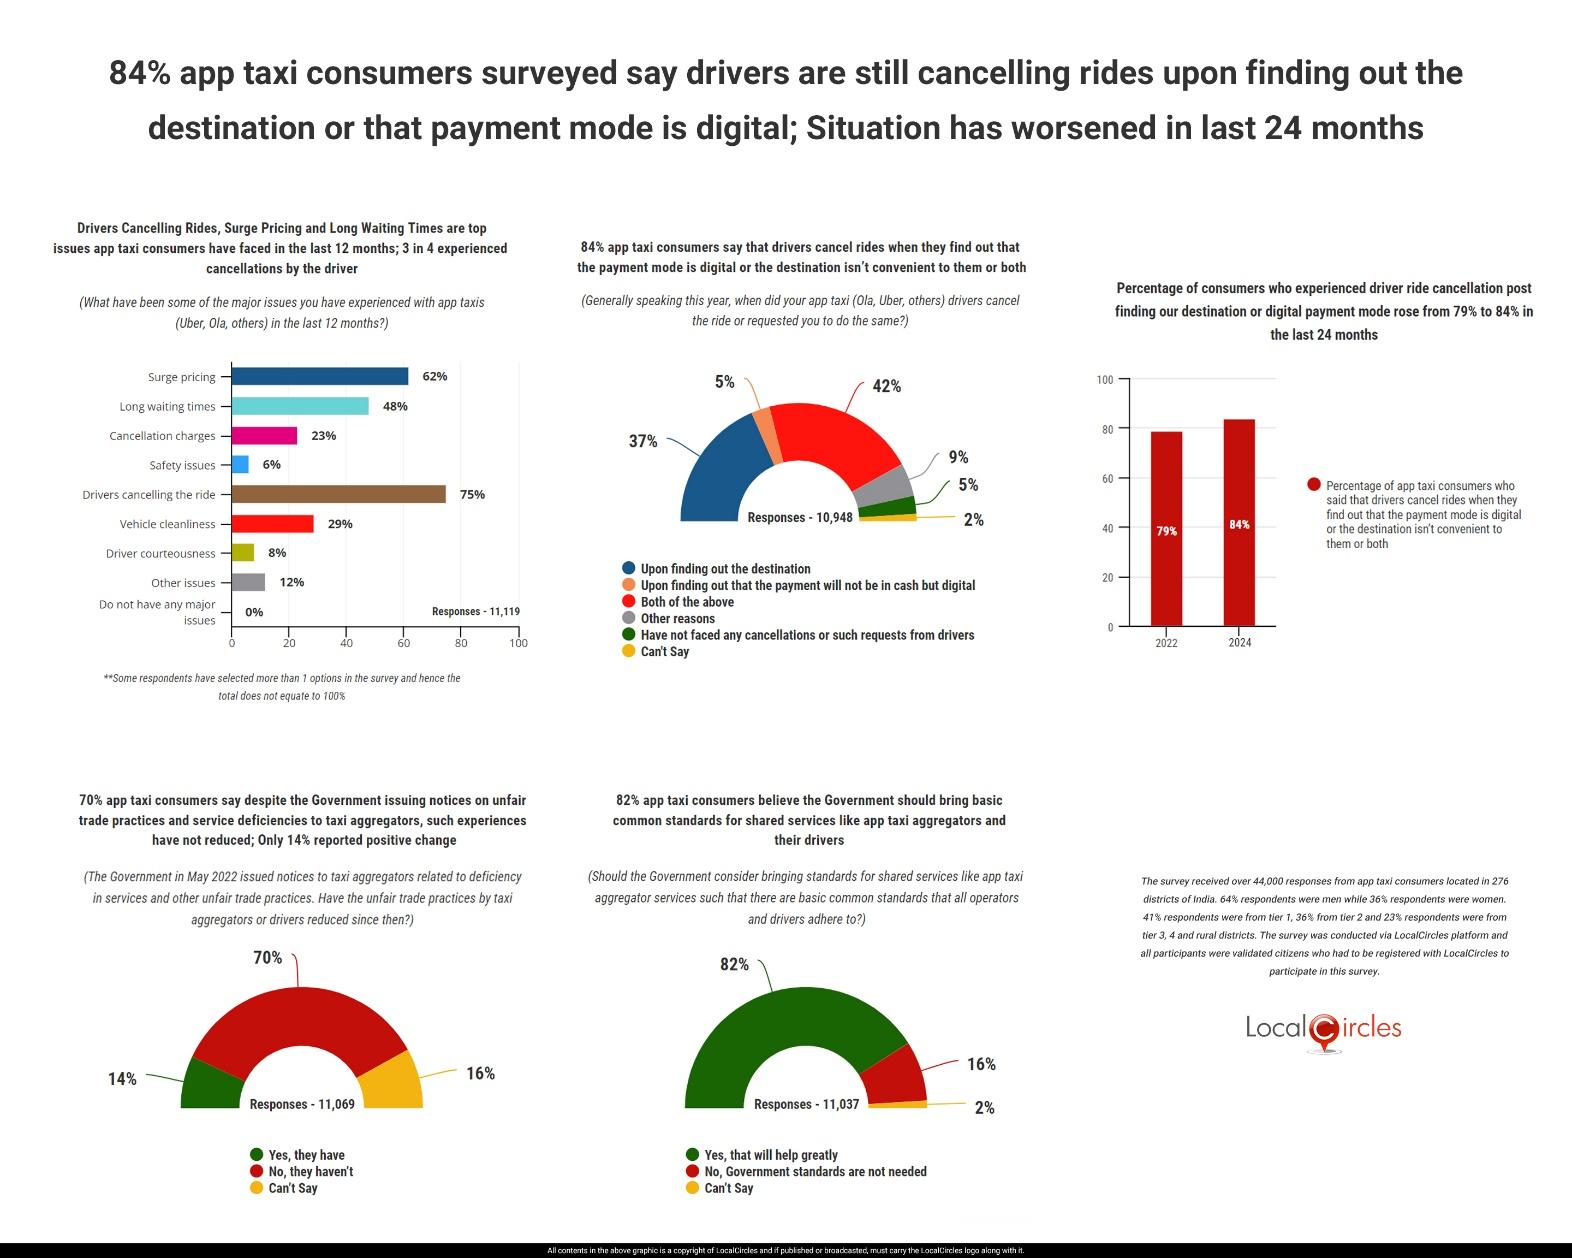 84% app taxi consumers surveyed claim drivers are still cancelling rides upon finding out destination or digital payment mode; Situation has worsened in last 24 months